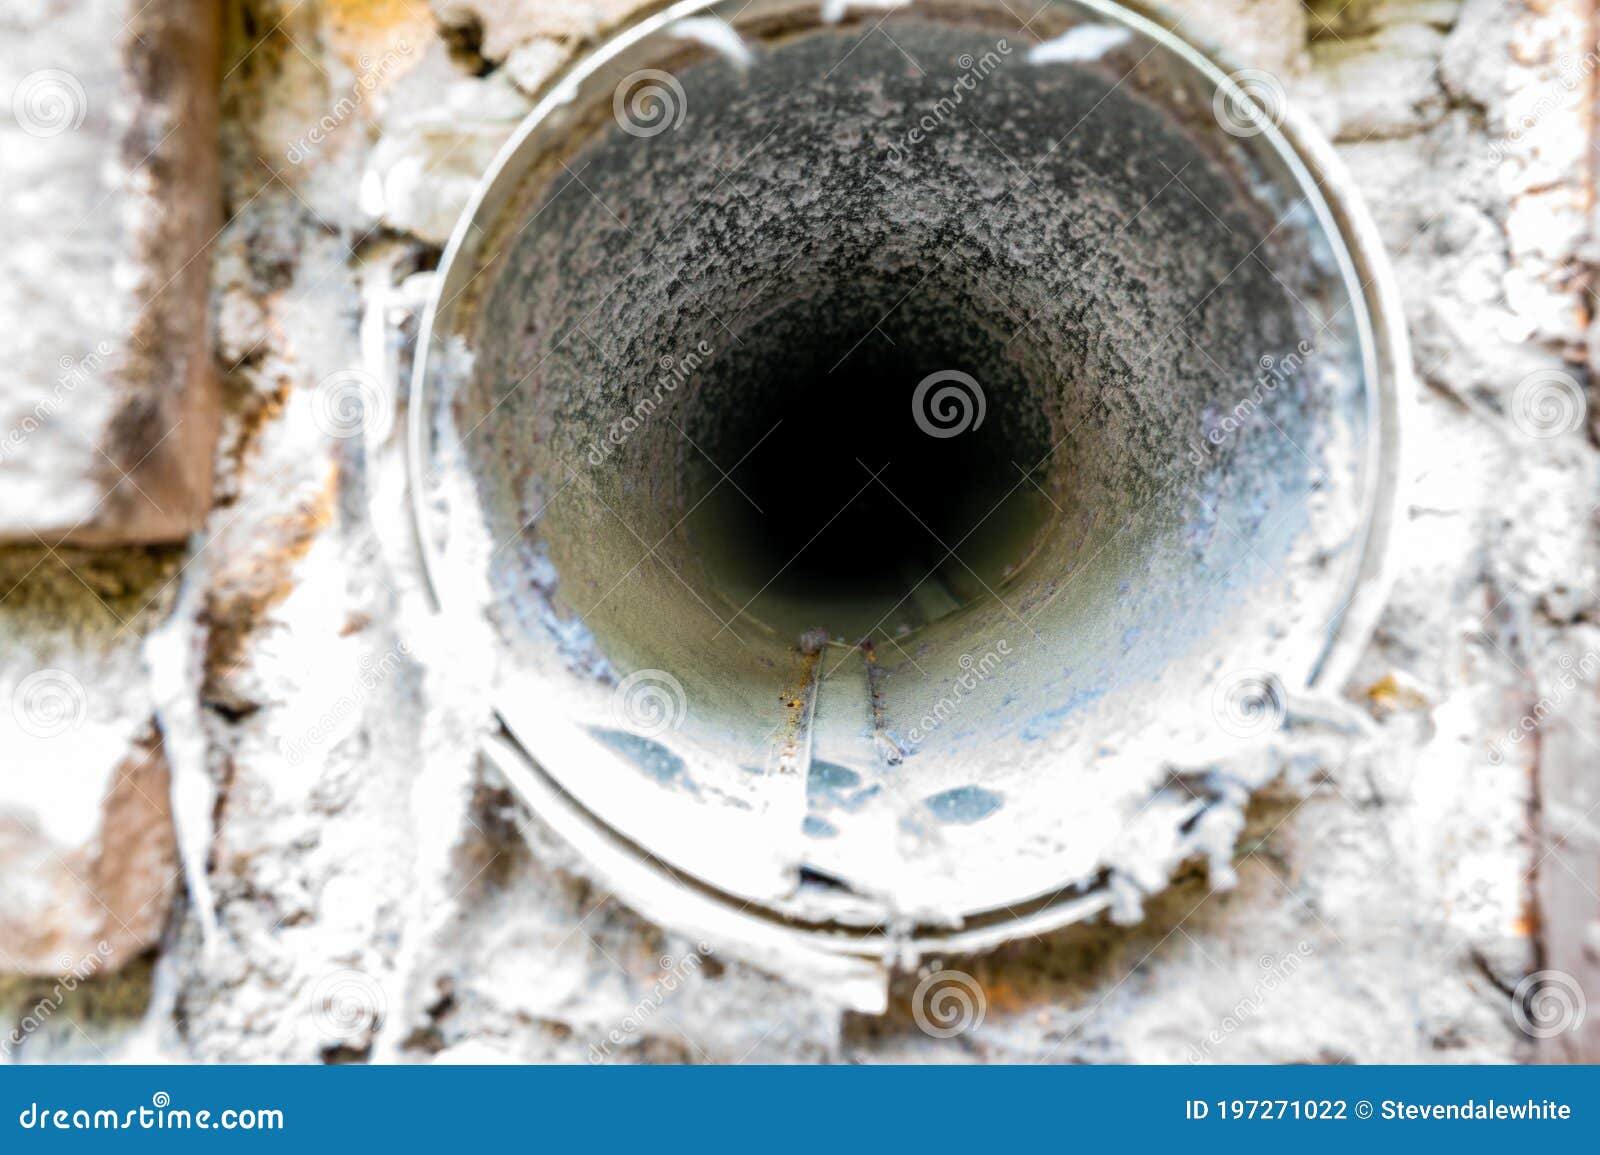 interior view of dryer vent line with lint and dust buildup